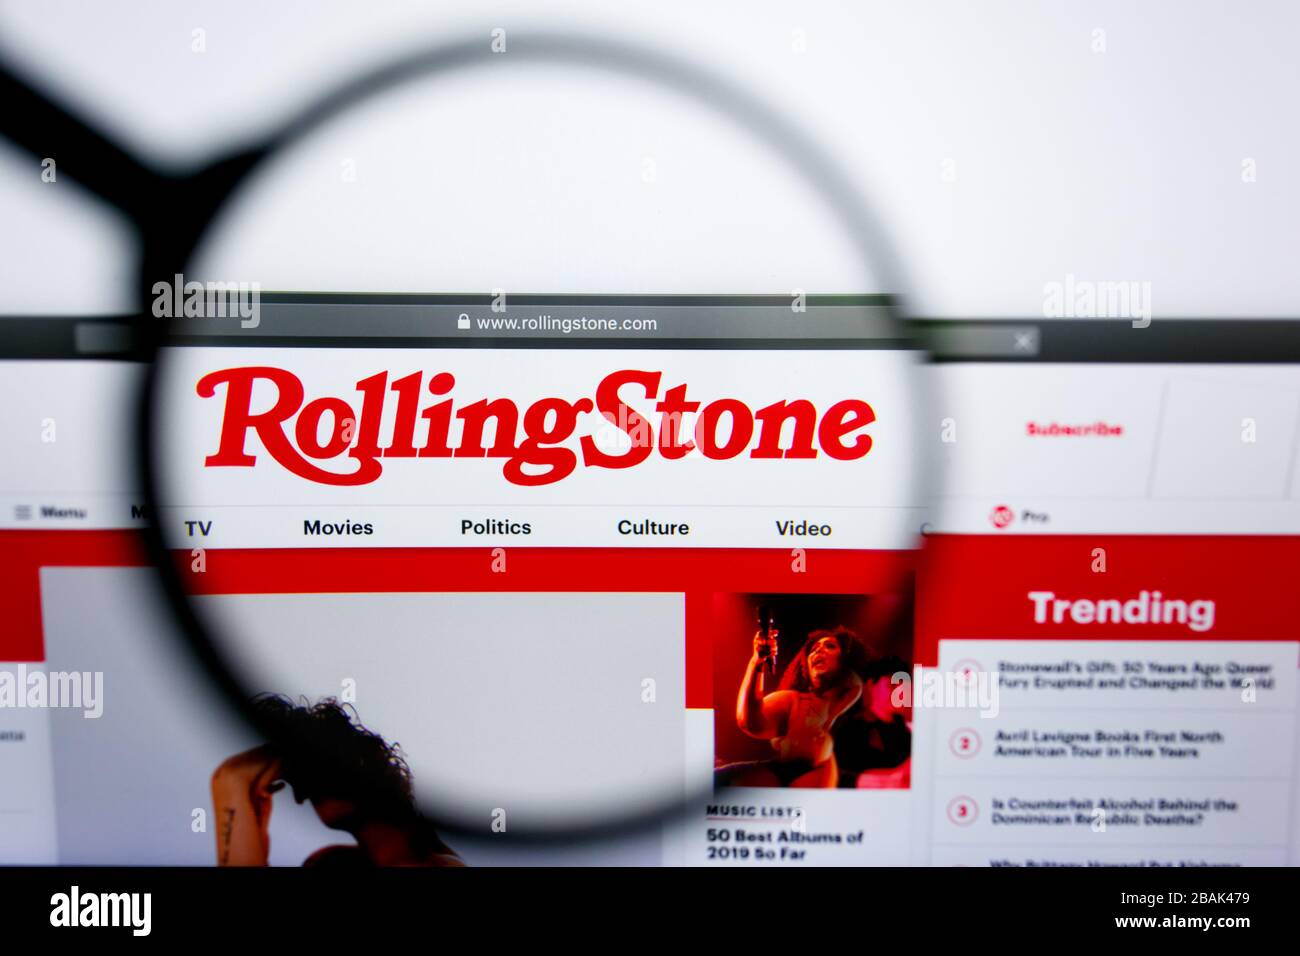 Los Angeles, California, USA - 25 June 2019: Illustrative Editorial of RollingStone website homepage. Rolling Stone logo visible on display screen. Stock Photo